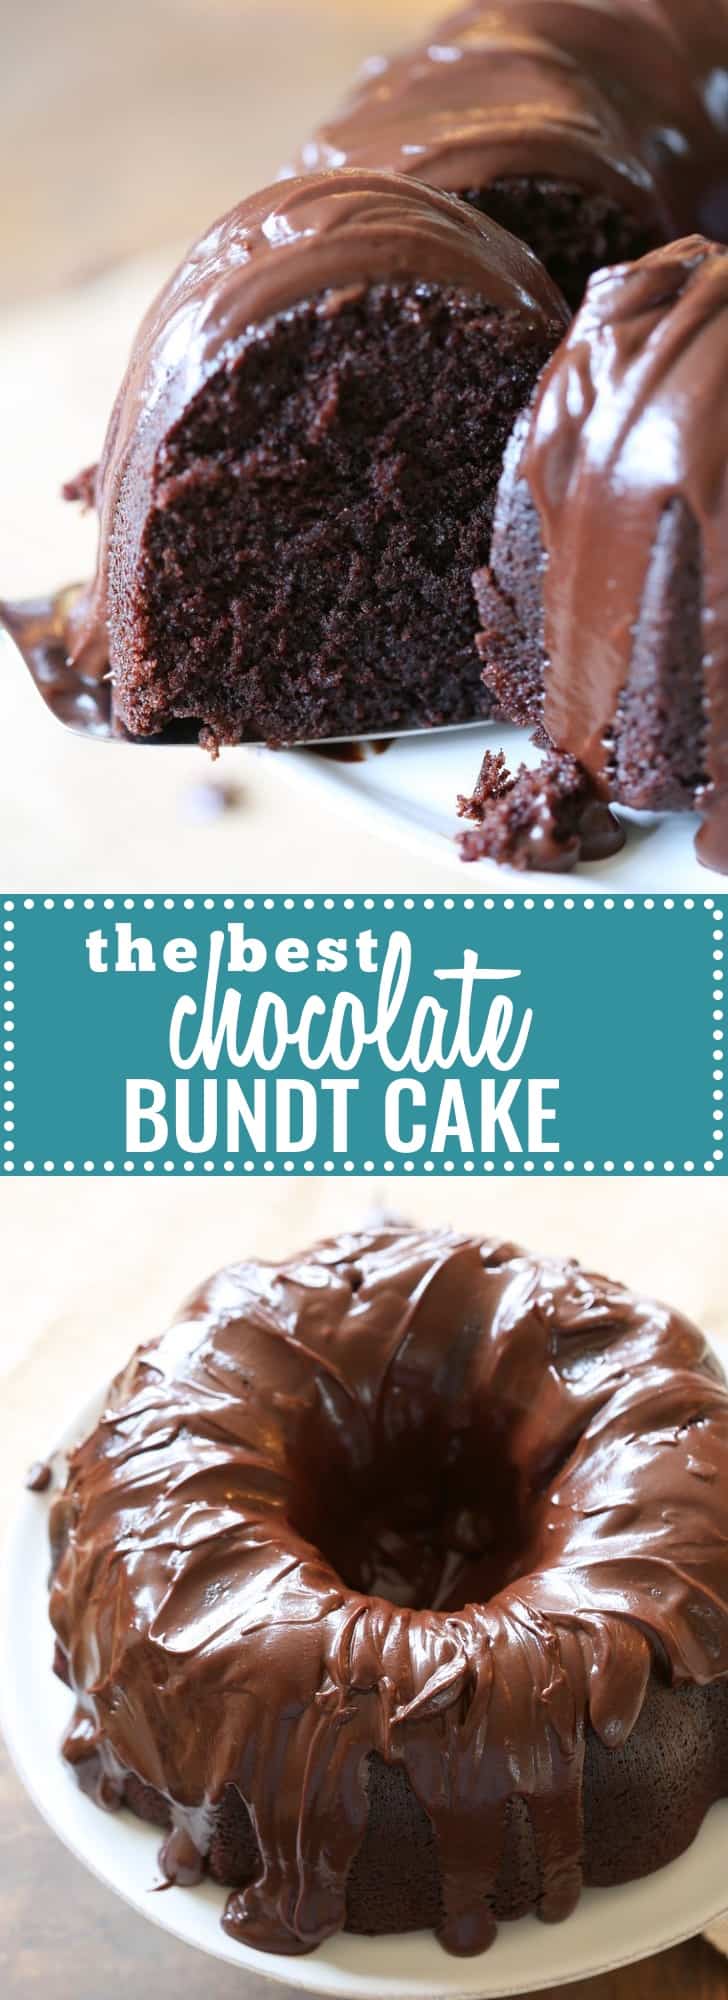 The Best Chocolate Bundt Cake: This really is the best (and thankfully most foolproof) chocolate cake around. With a rich, thick glaze, this little beauty is great the day you make it, but even better after a day or two in the fridge. 